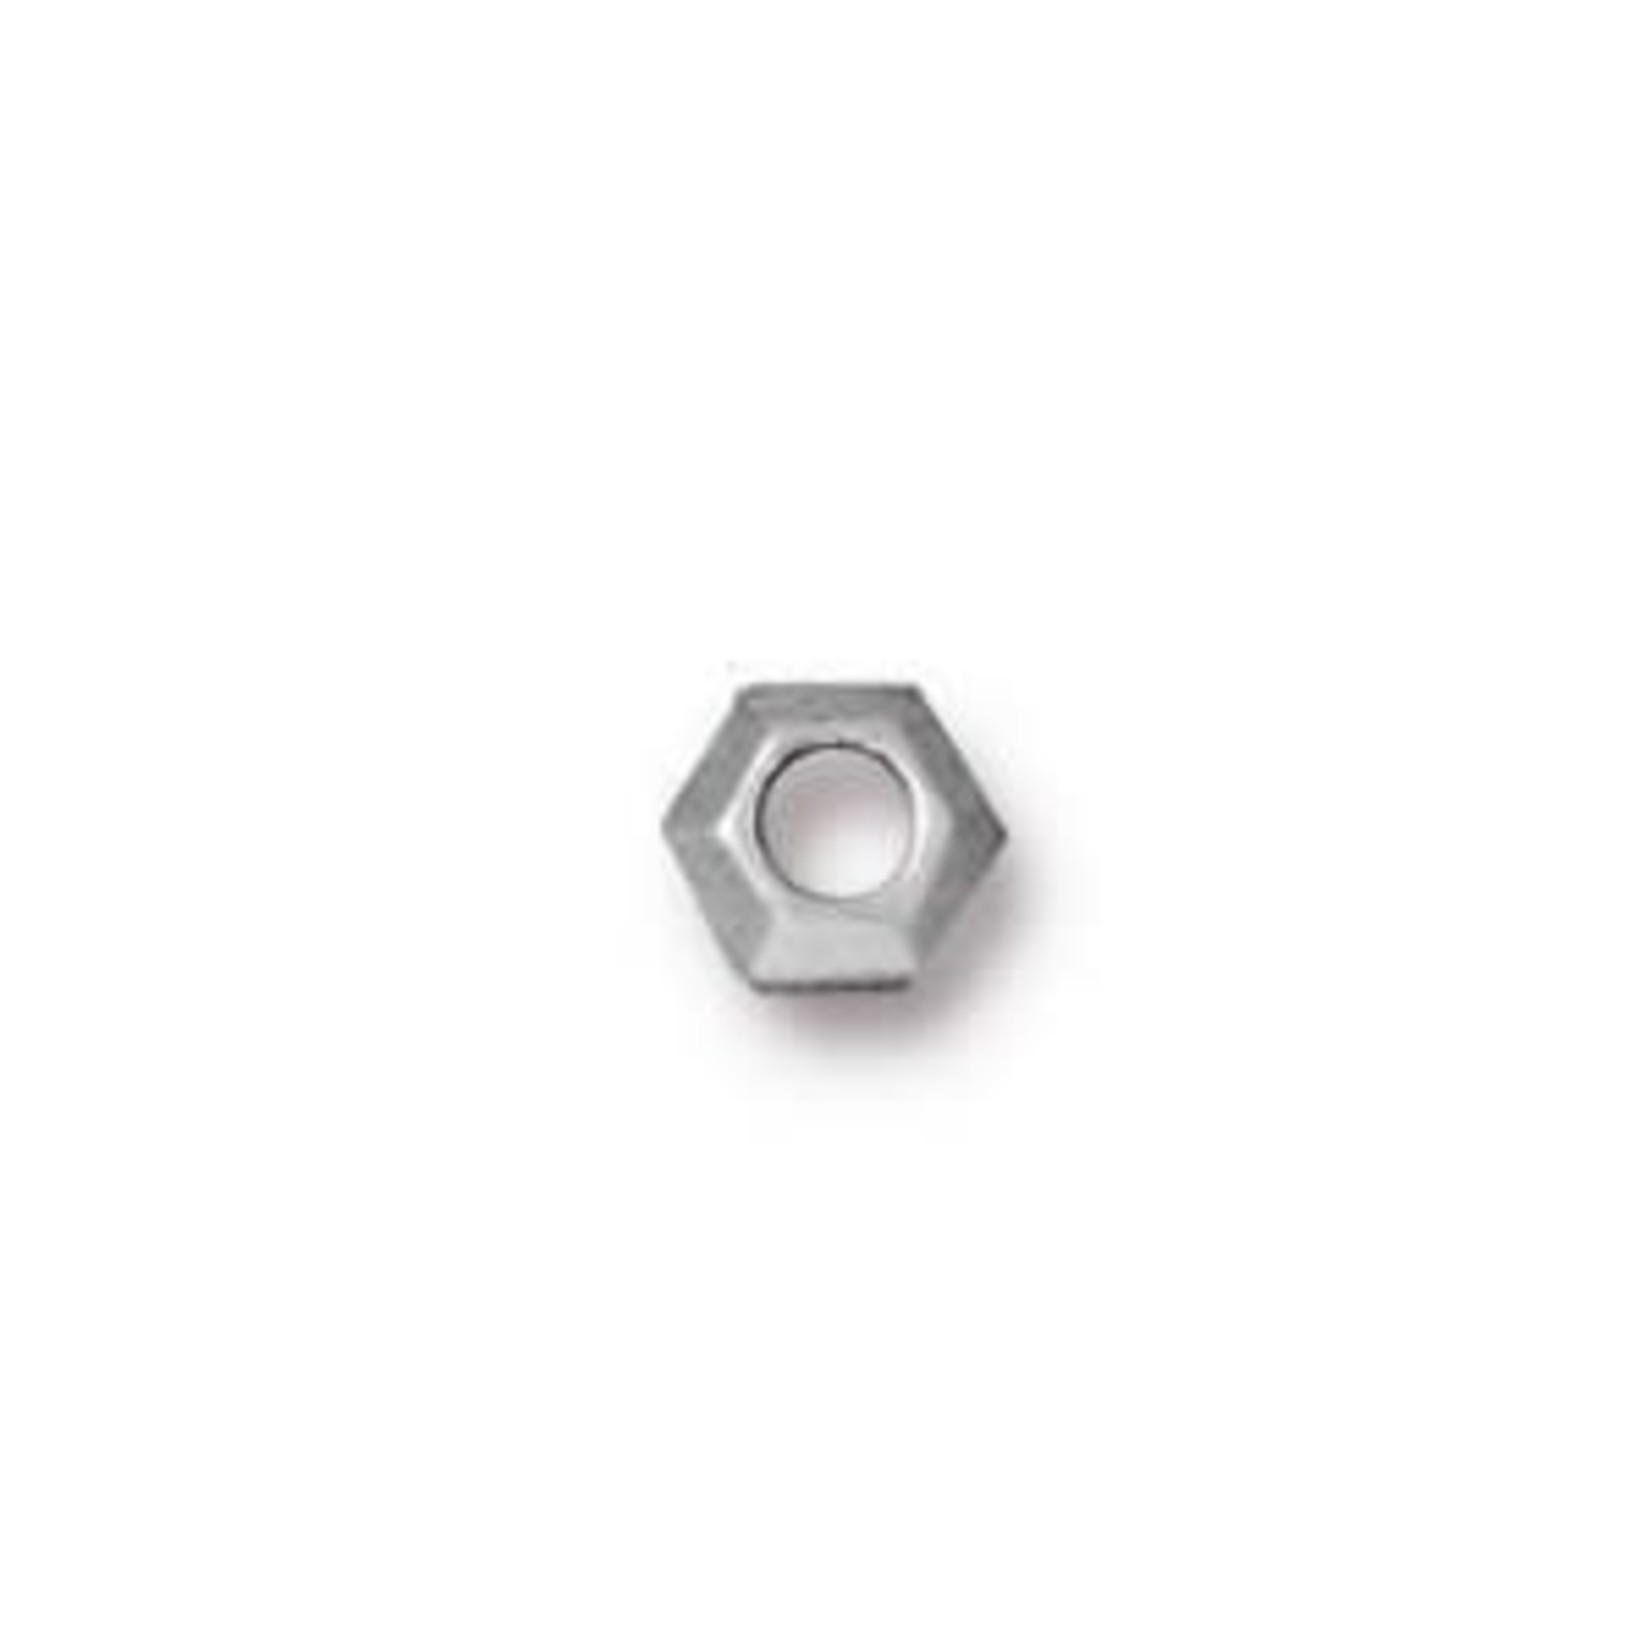 Tierracast Antique Silver 5mm Faceted Large Hole Spacer Bead - Single